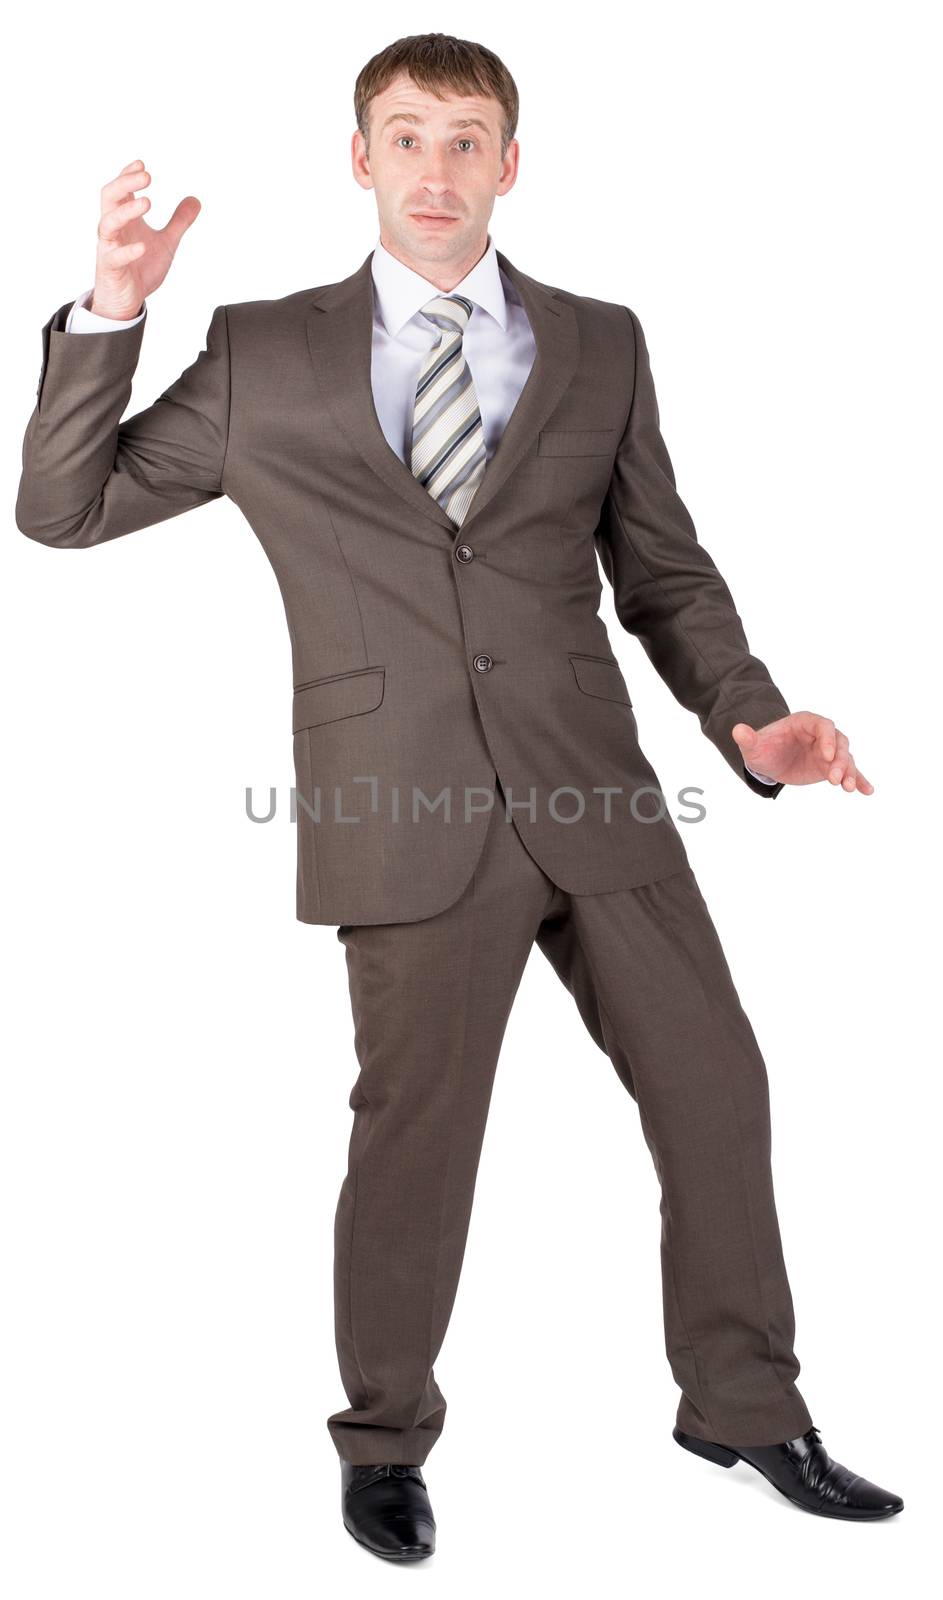 Businessman looking suprised. Isolated on white background.